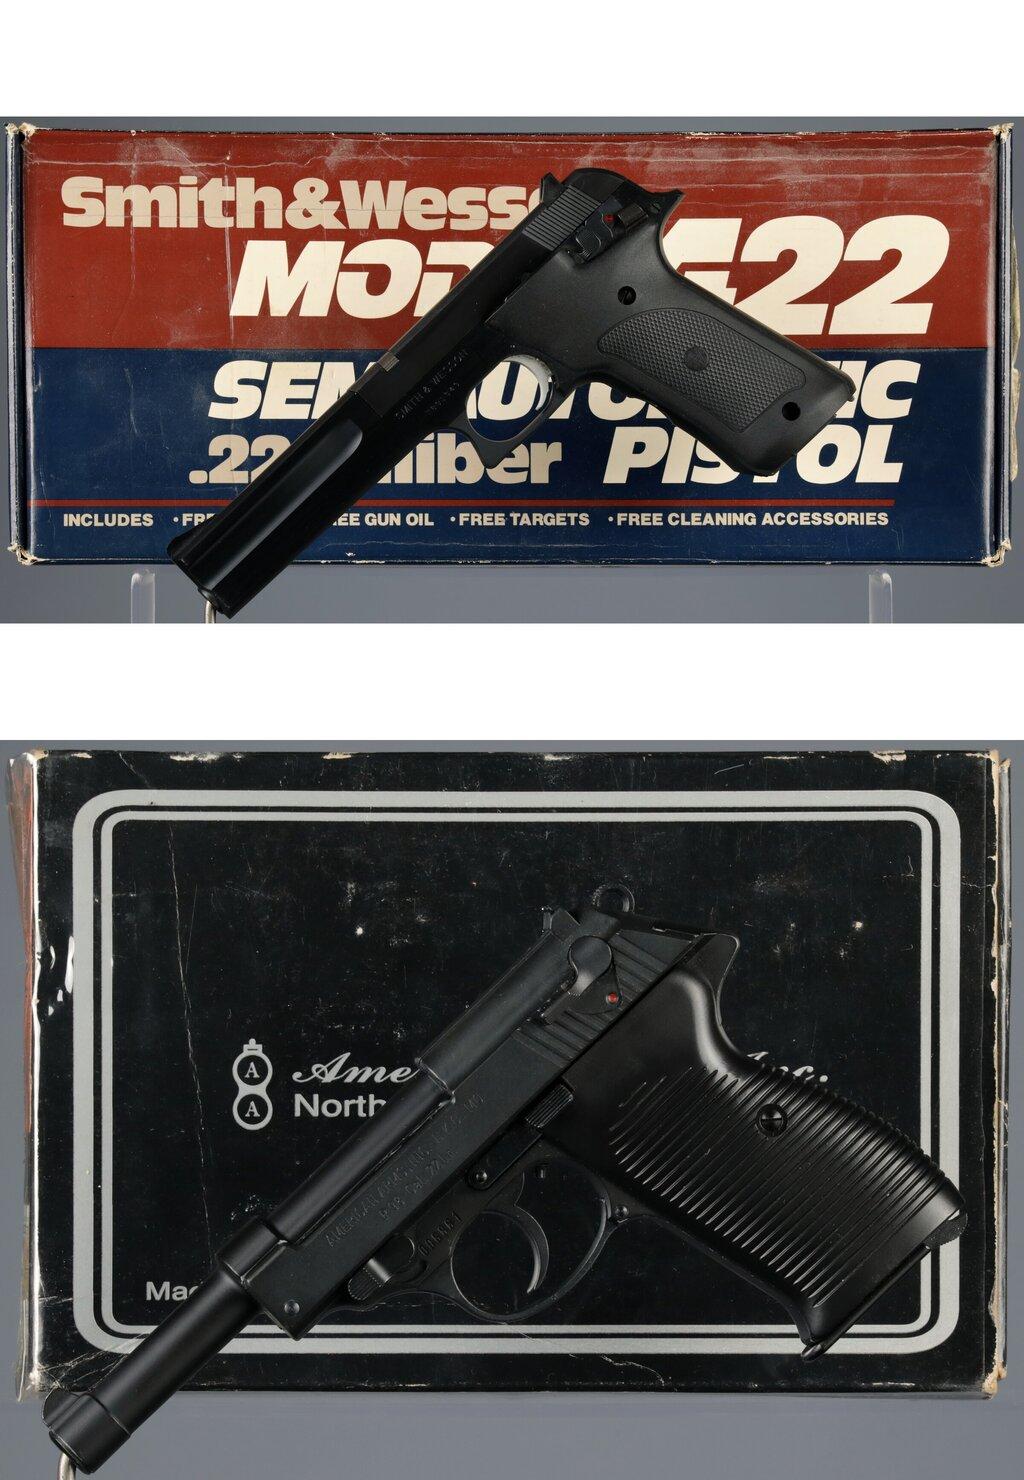 Two Semi-Automatic Pistols with Boxes